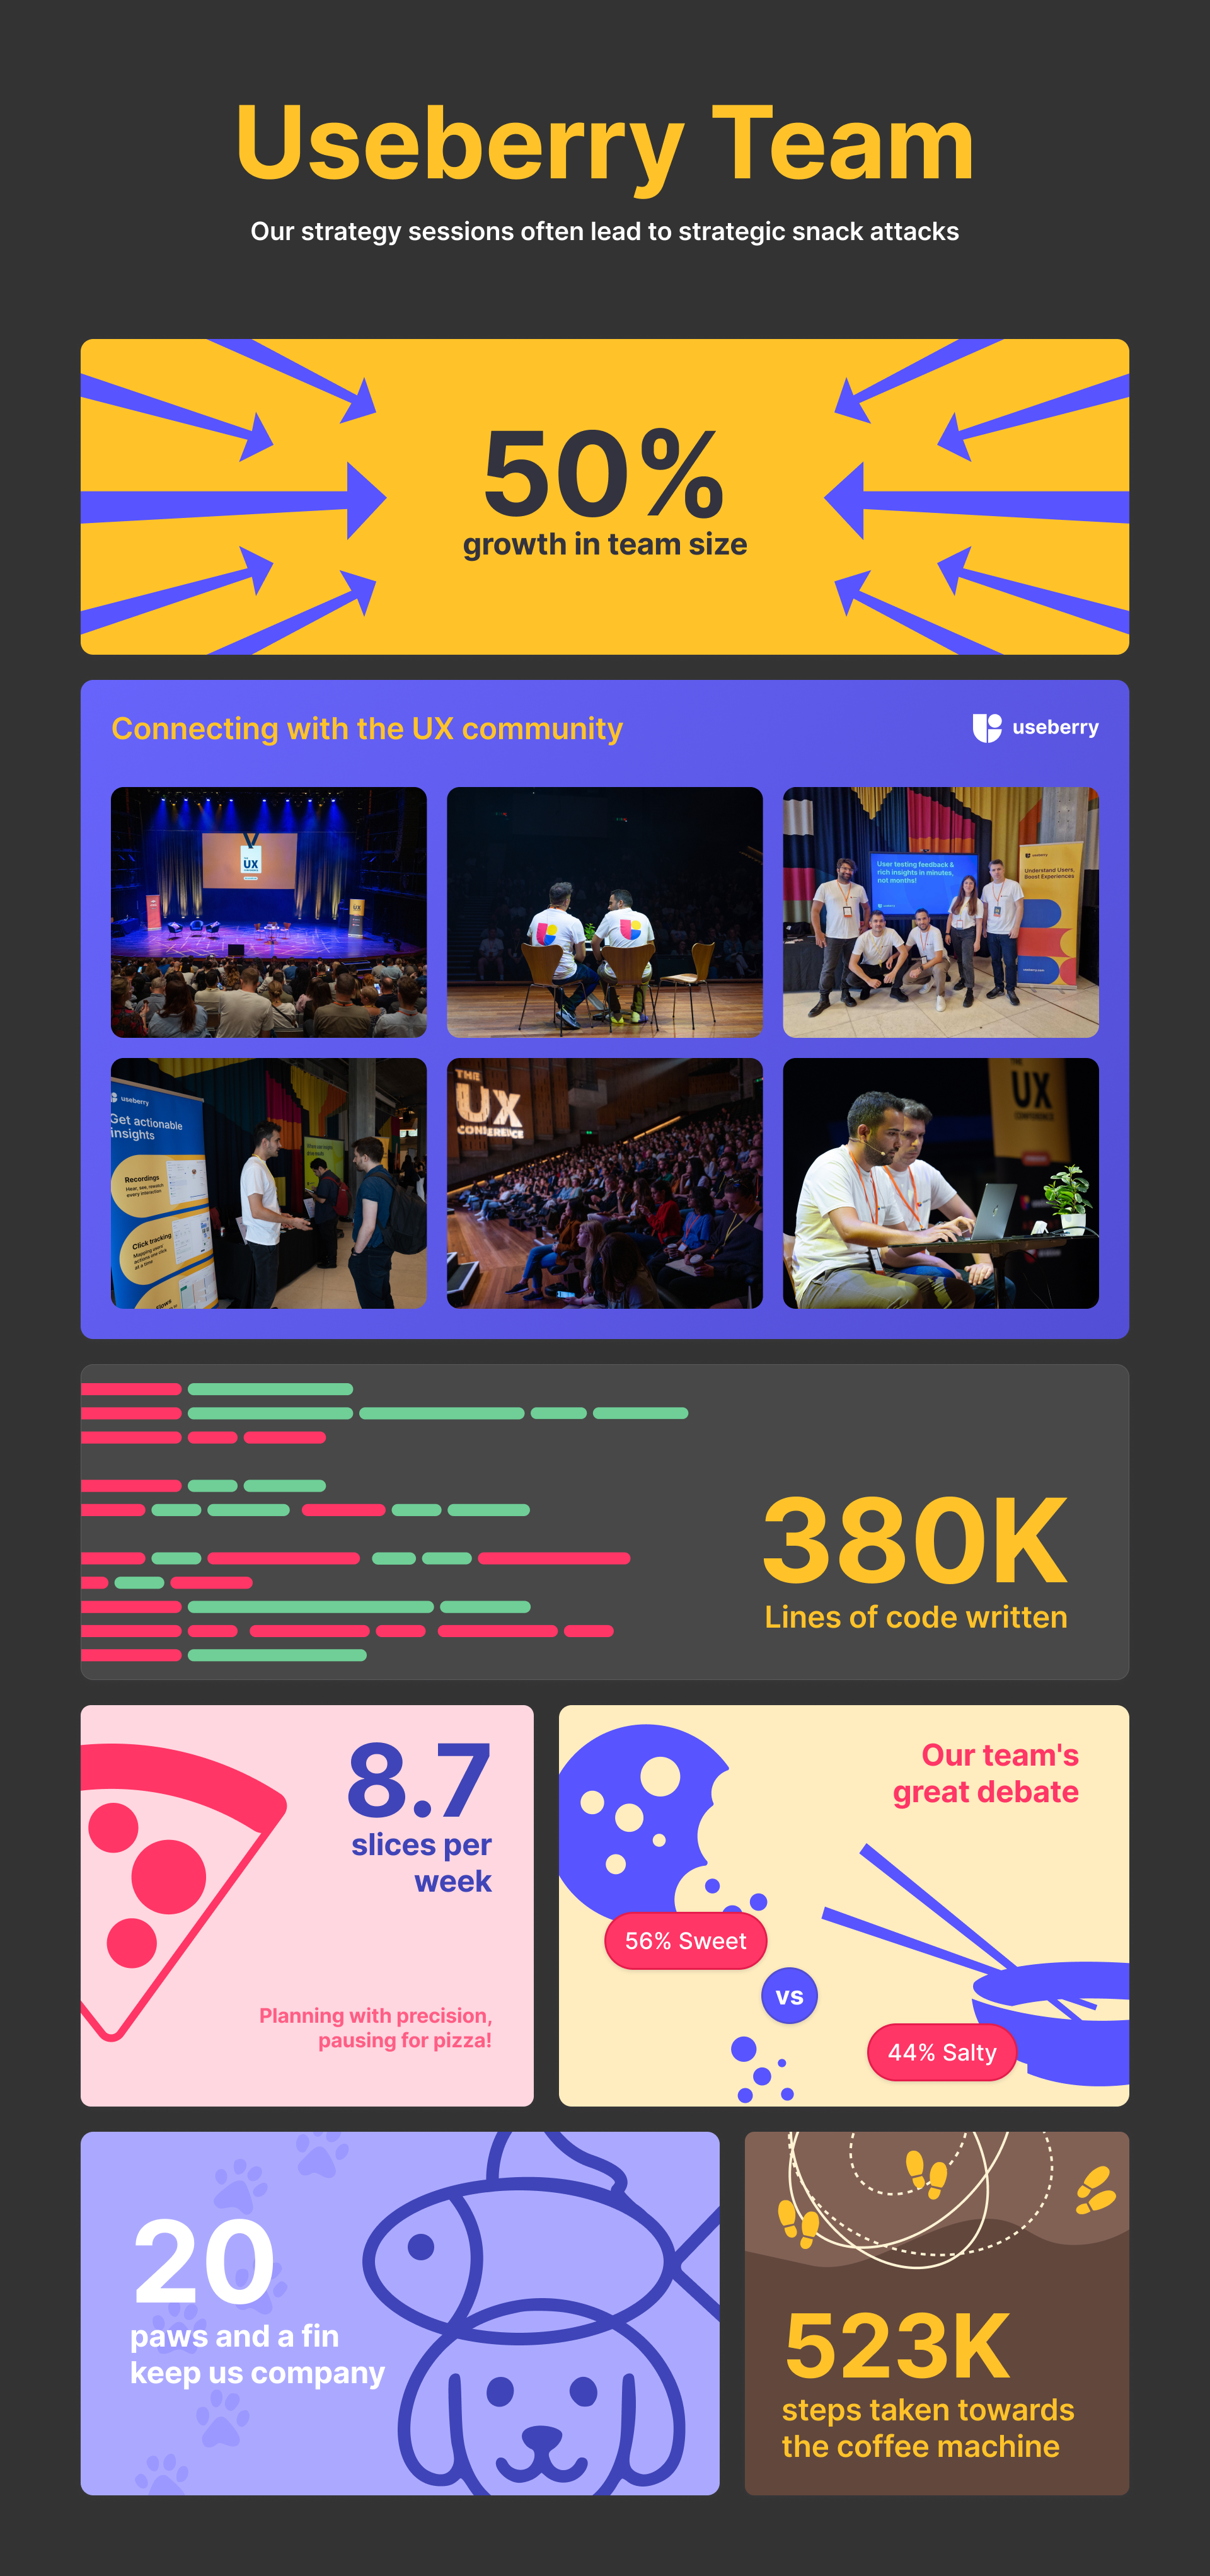 Colorful infographic displaying Useberry Team's stats: '50% growth in team size,' photos from UX community events, '380K lines of code written,' and fun facts like '8.7 pizza slices eaten weekly,' a 'Sweet vs. Salty' snack debate, '20 office pets,' and '523K steps to the coffee machine.' Light-hearted visuals emphasize team culture and productivity.